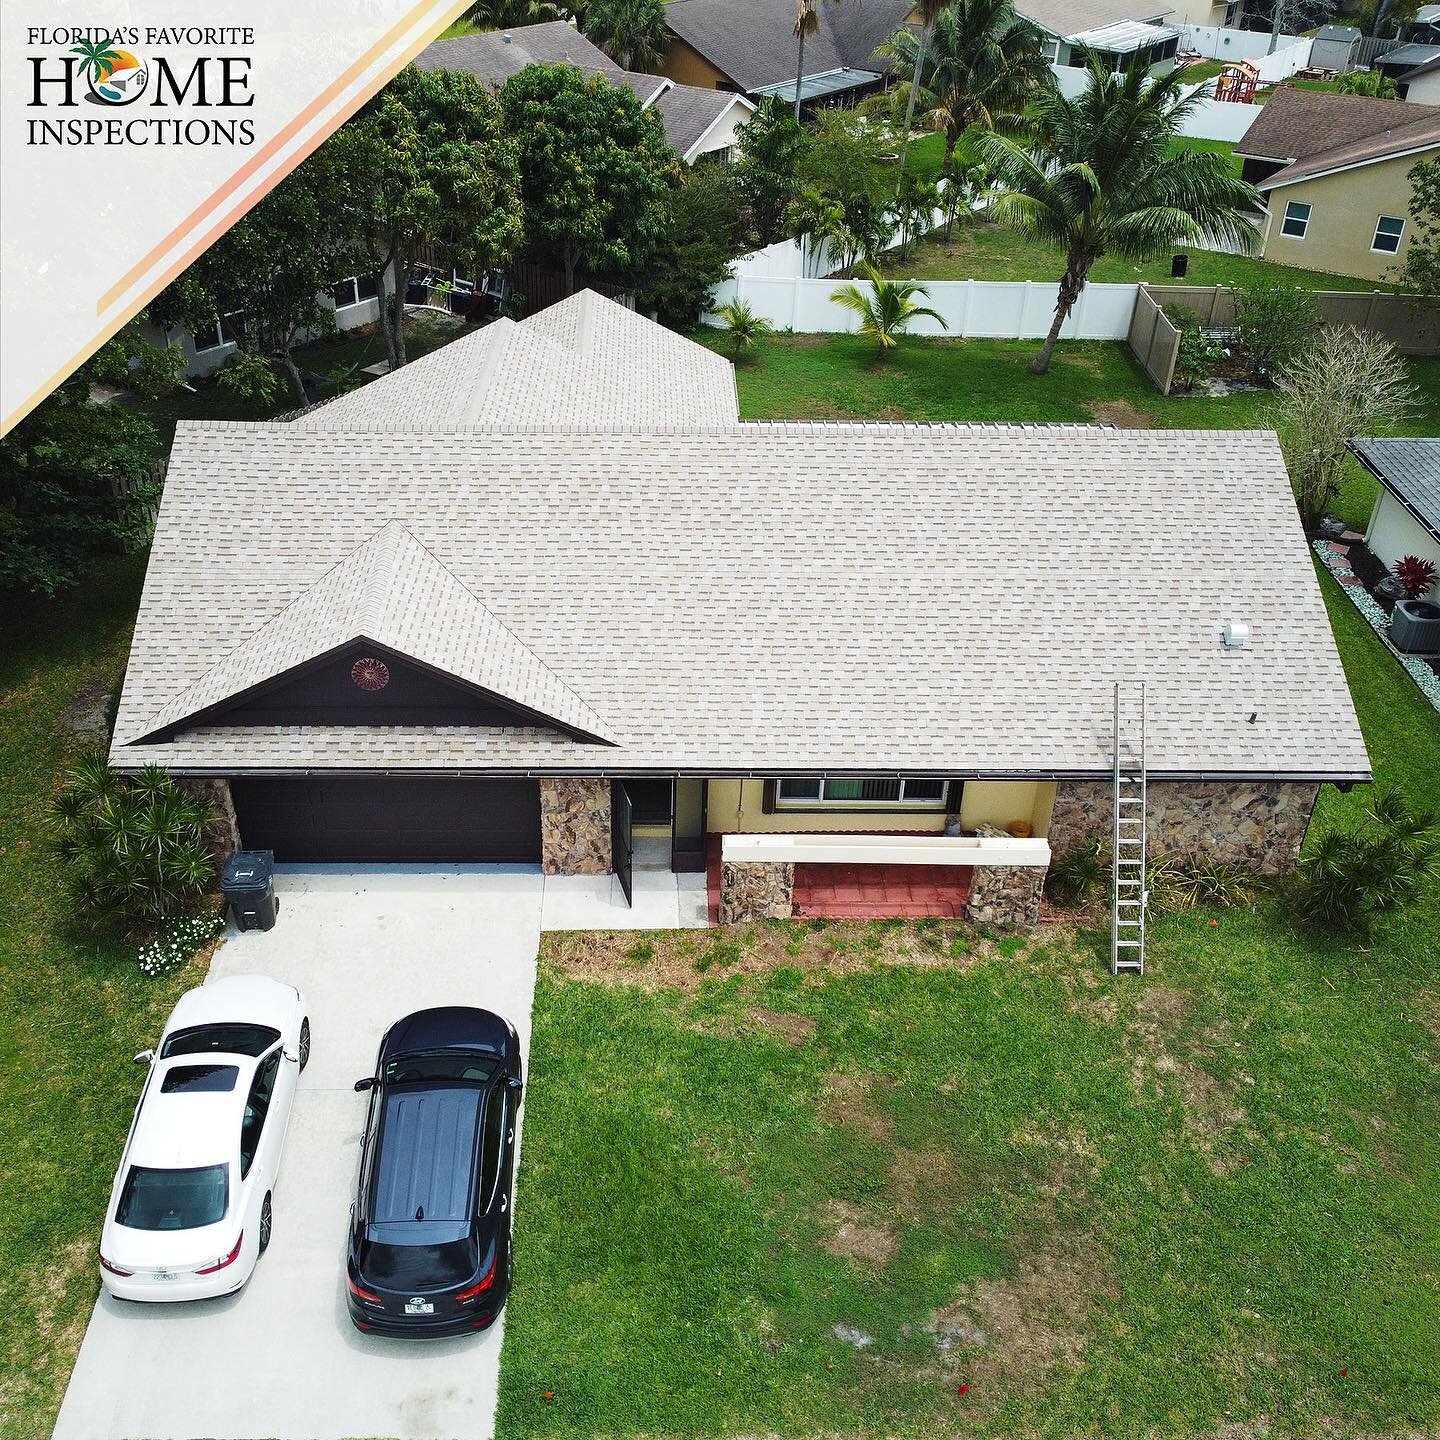 Recently inspected home in Lake Worth, Florida!